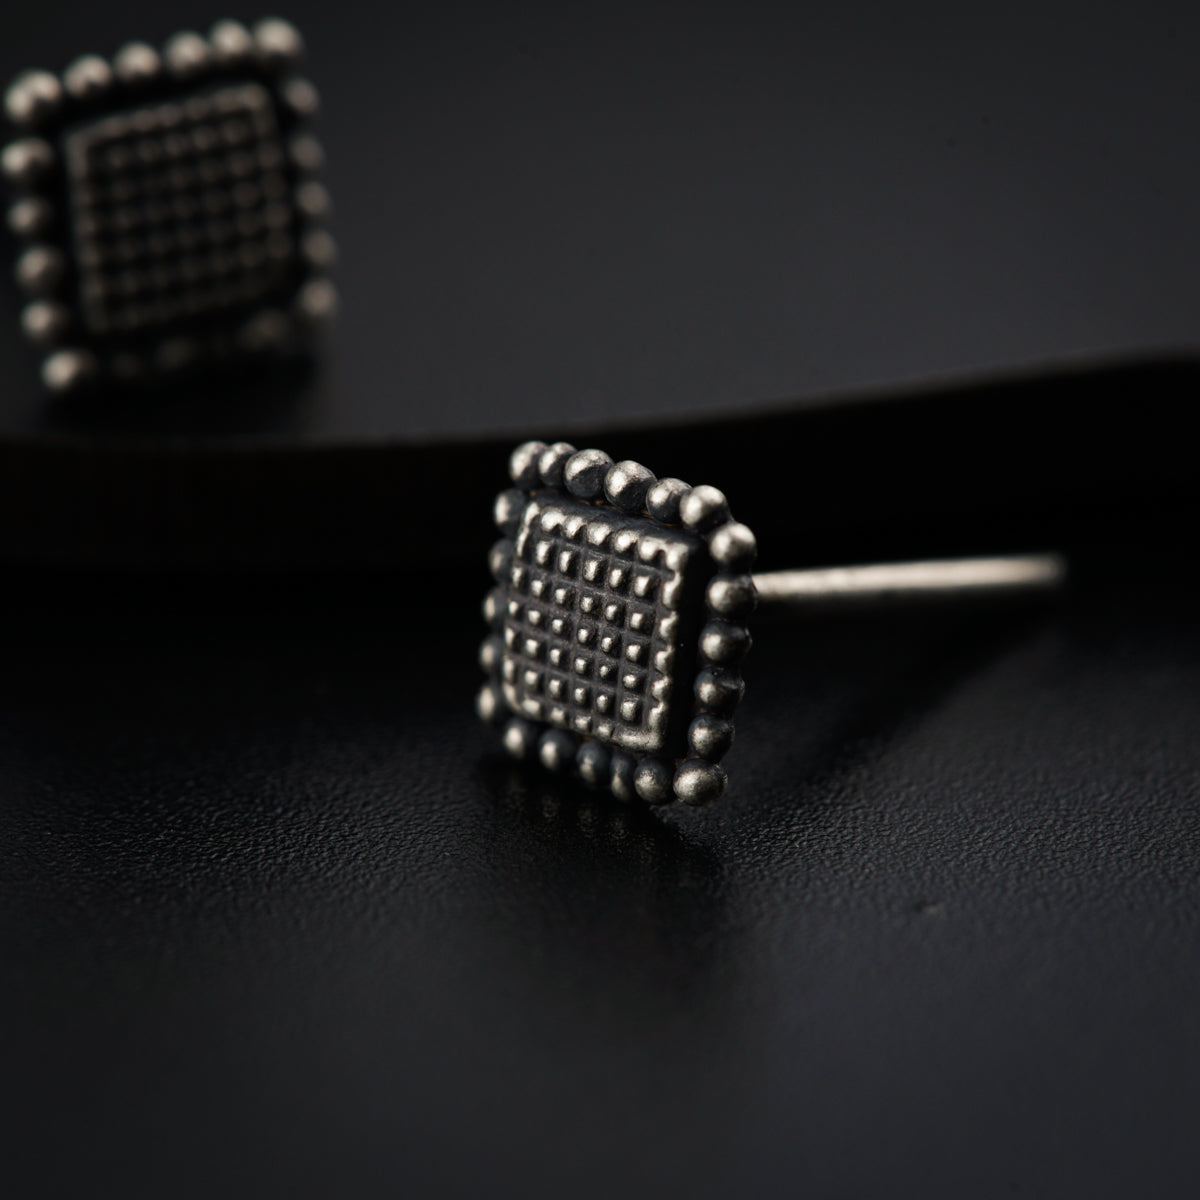 a pair of studded earrings sitting on top of a black surface